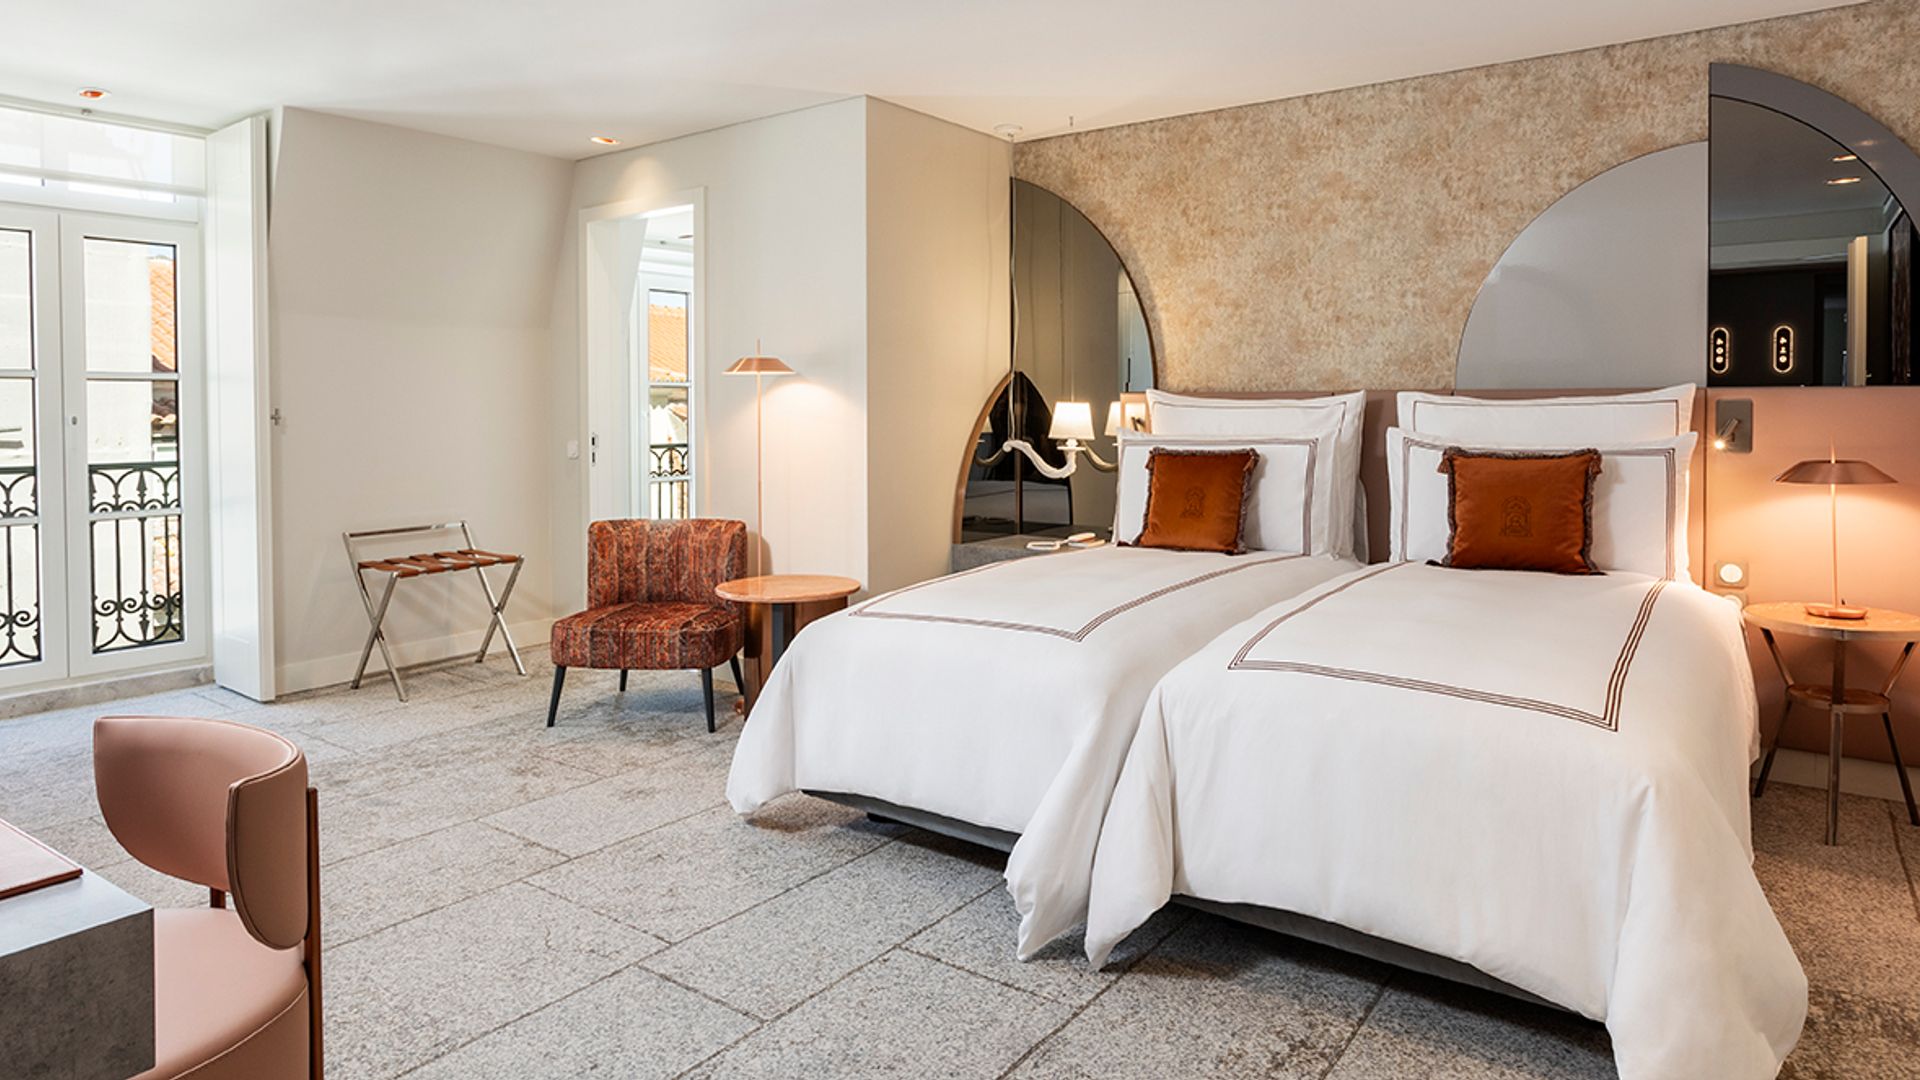 What it’s like to stay at Lisbon’s new luxury hotel on the block